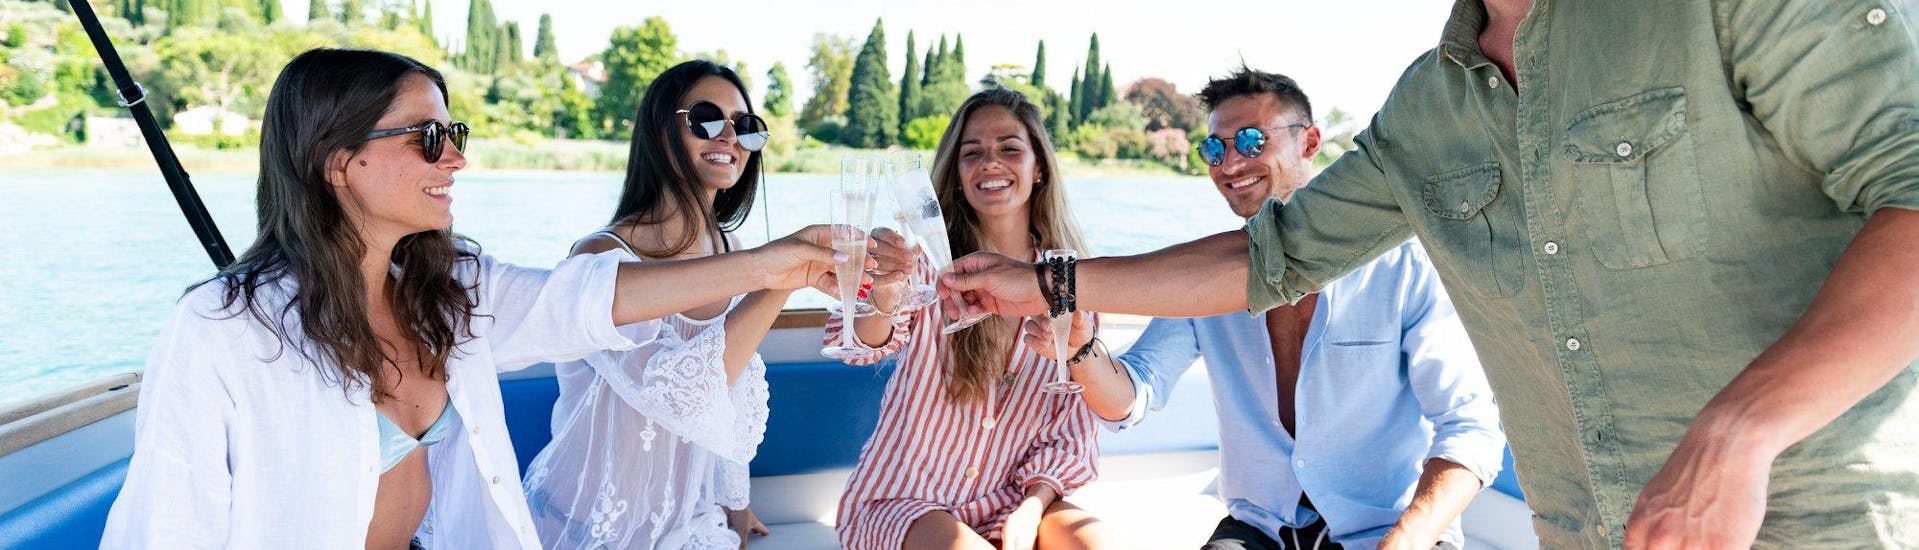 A group of friends raise a glass of wine on board a Sirmione Boats motorboat during a boat trip to the Lake Garda Castles and Bardolino.